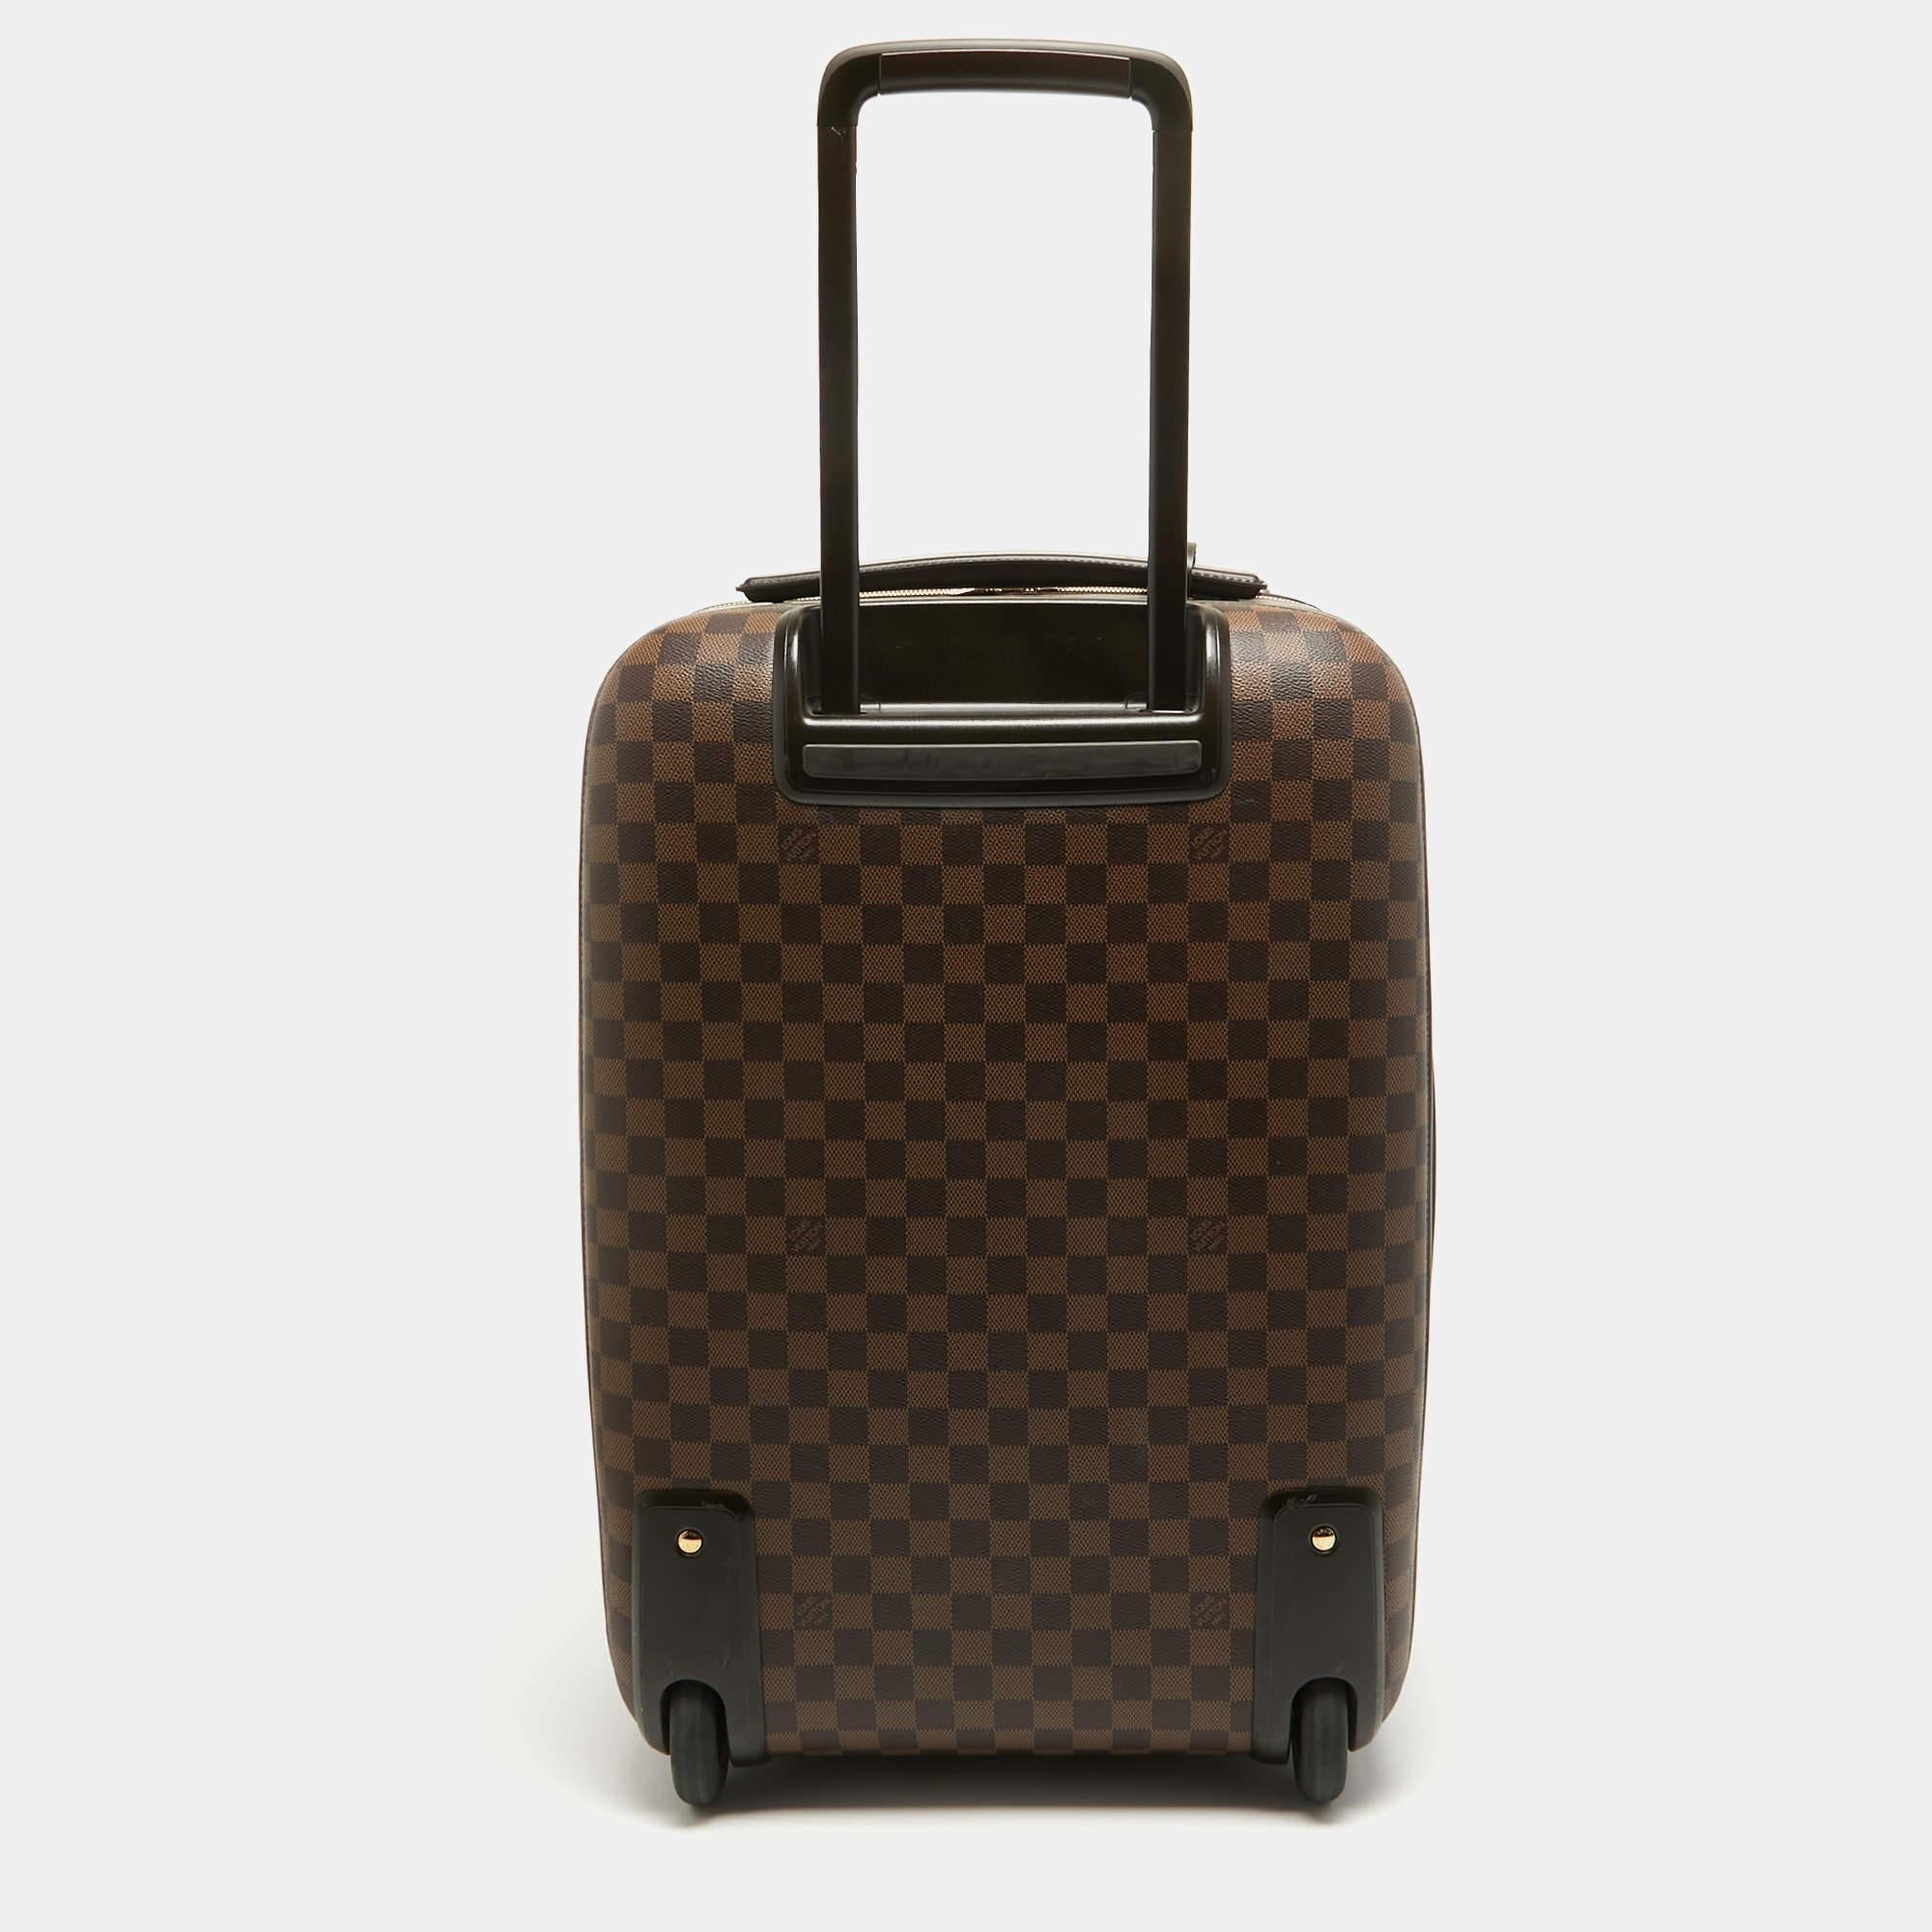 Travel to the places your heart desires with this LV luggage case. It is made of high-grade materials in a spacious size. Robust and ultra-mobile, it glides along smoothly on its wheels, while its ingeniously arranged interior boasts many practical